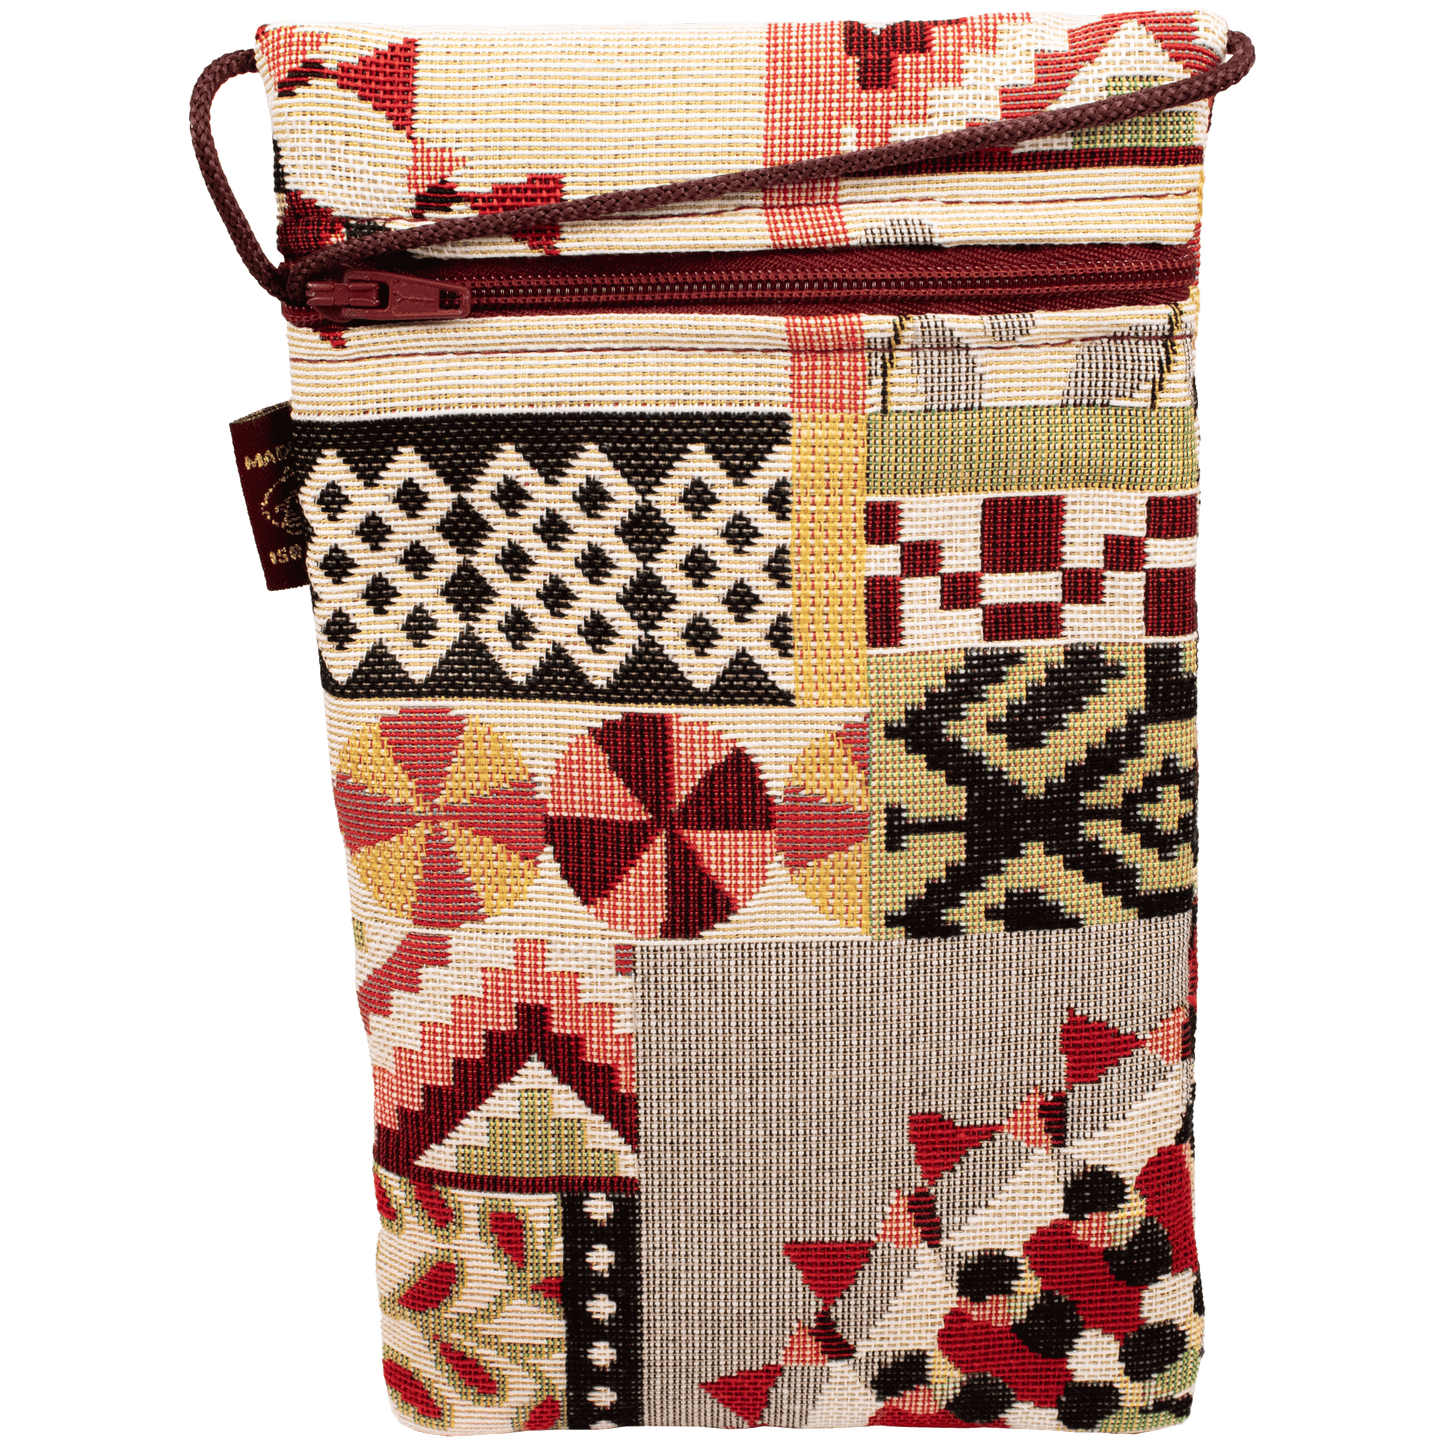 Slim rectangle purse with various patterns maroon black green and red colors